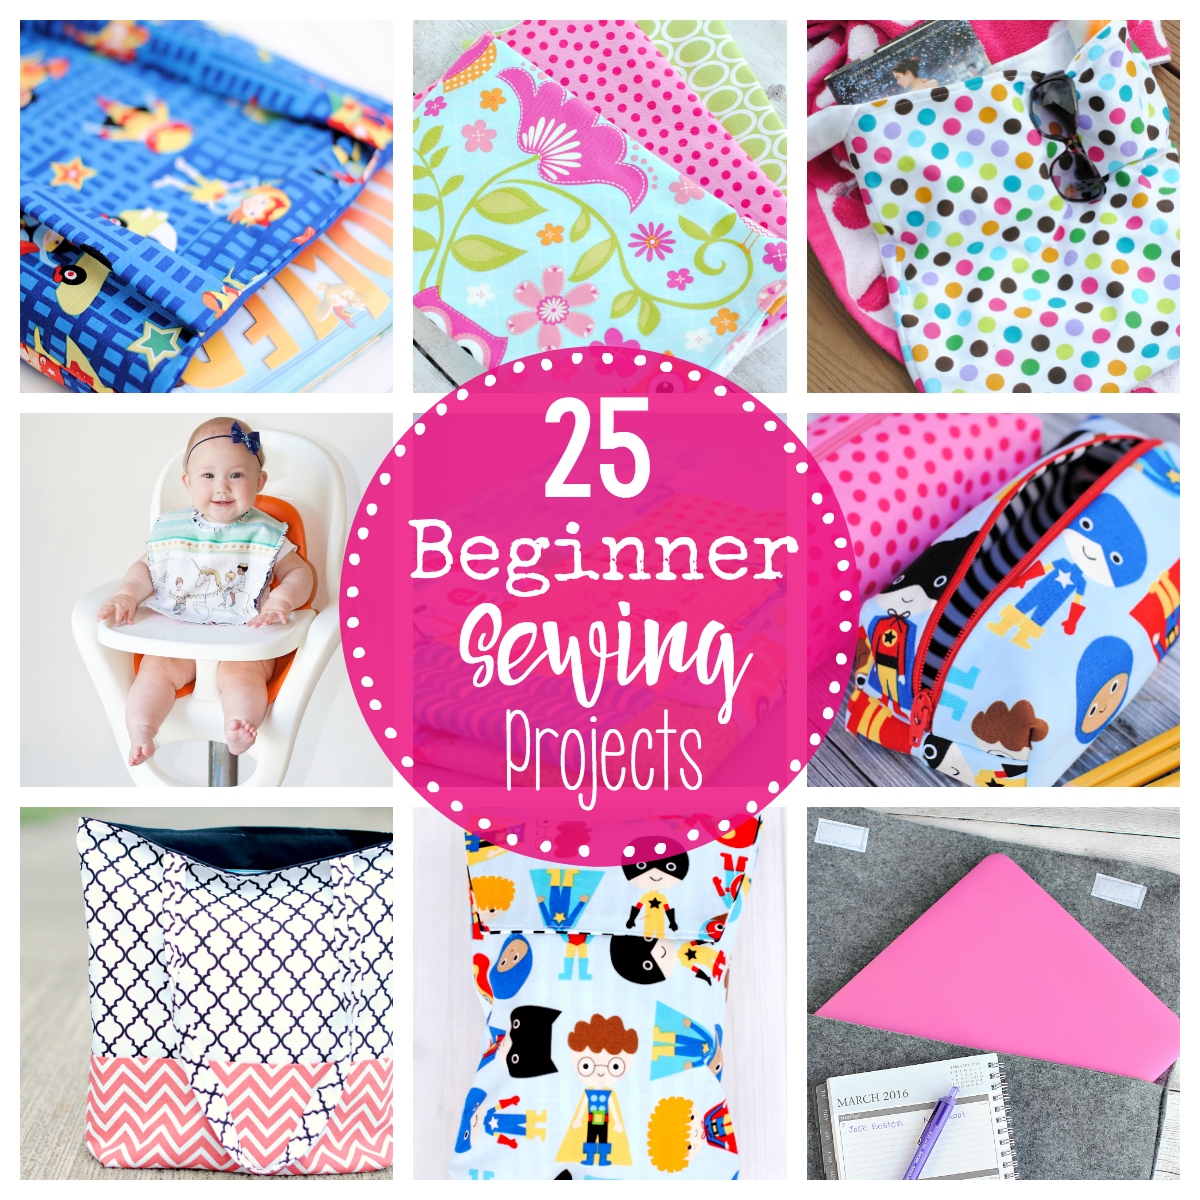 Sewing Patterns For Beginners 25 Beginner Sewing Projects